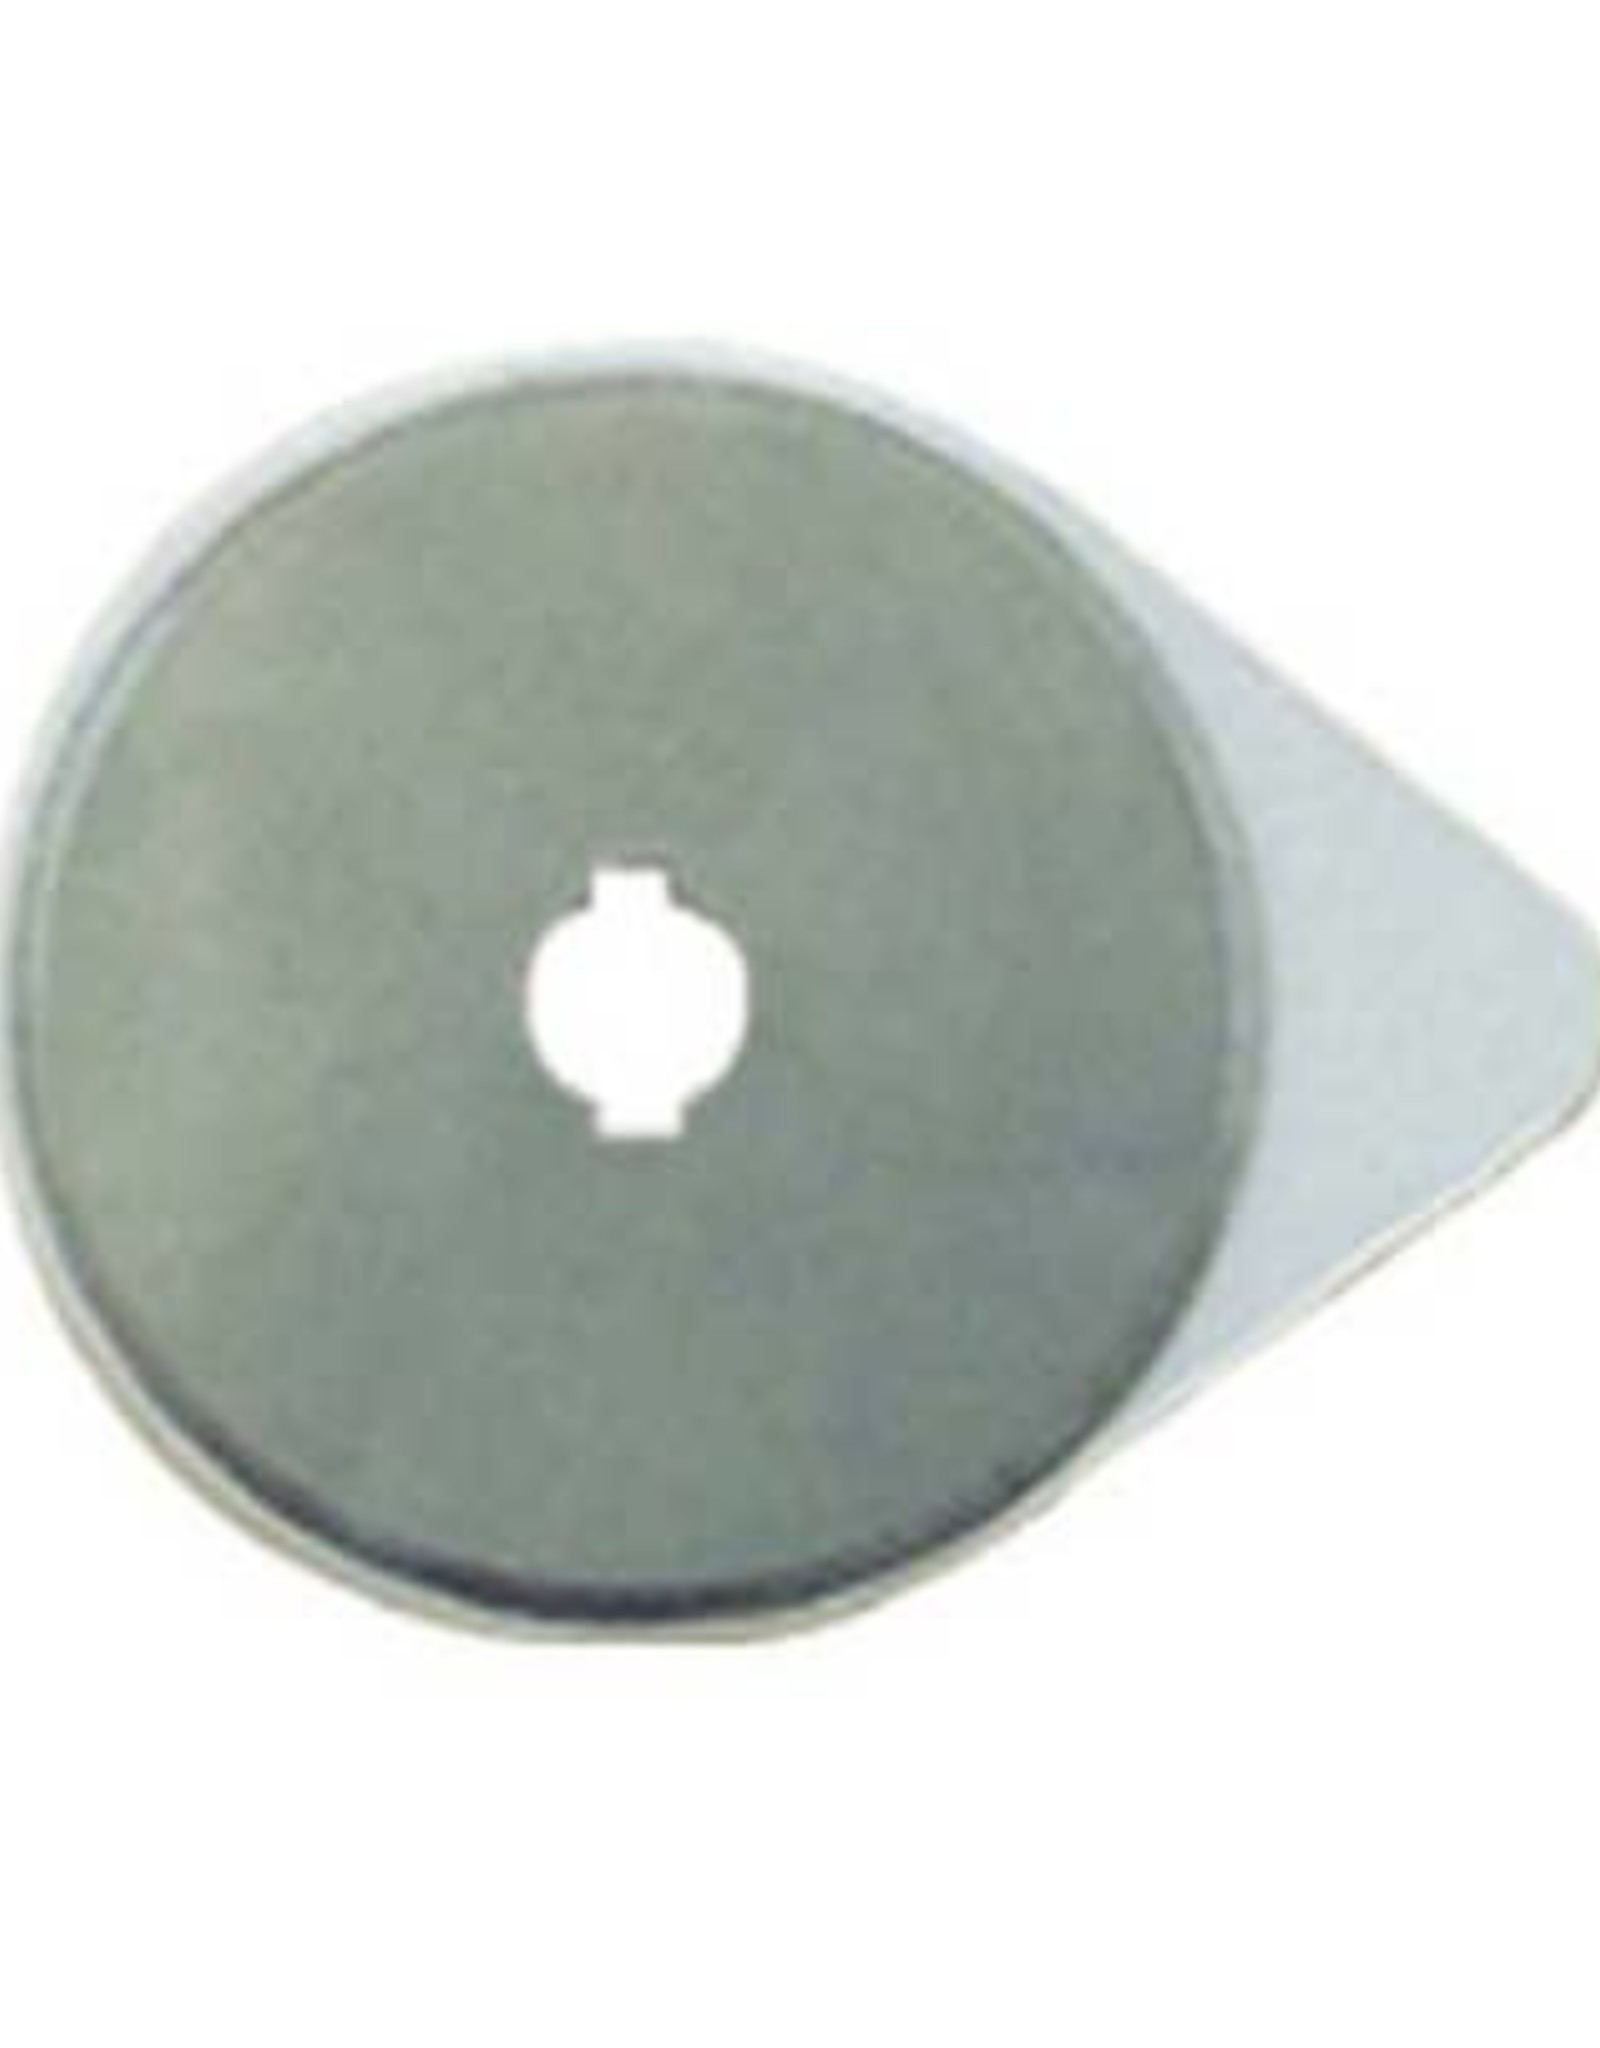 Clover 45mm Rotary cutter replacement (45mm)